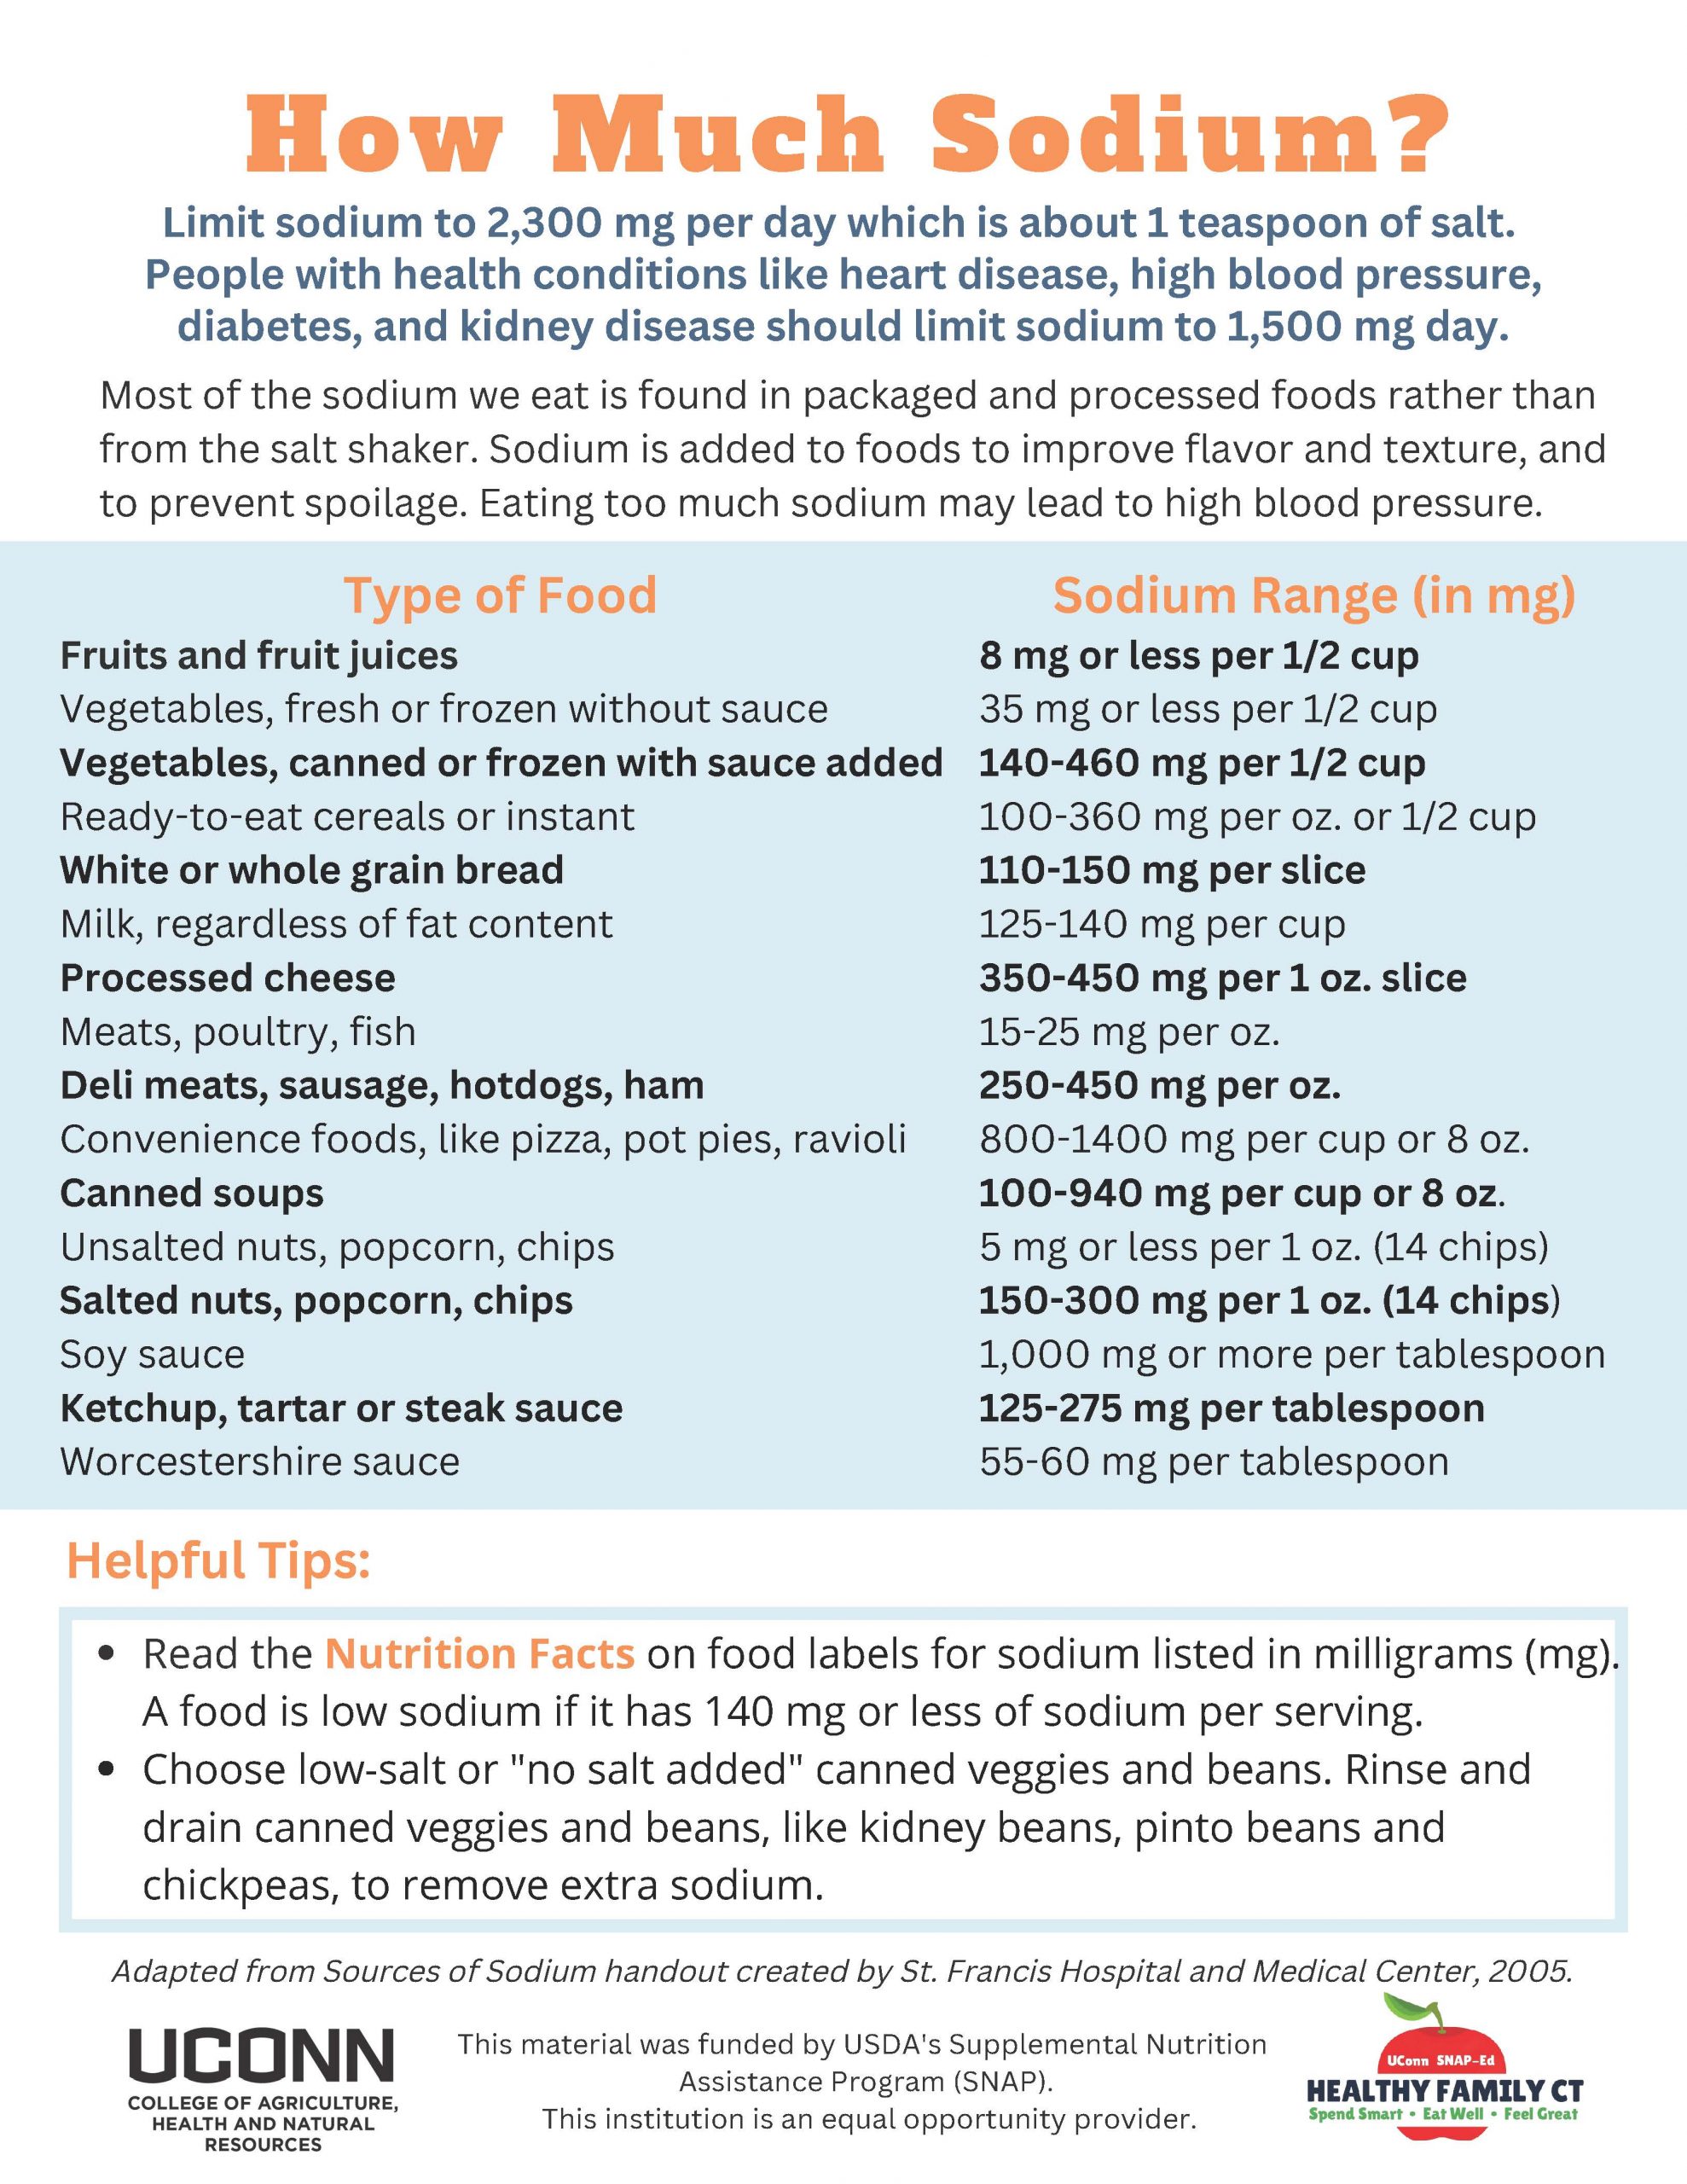 list of common foods and sodium content listed in milligrams